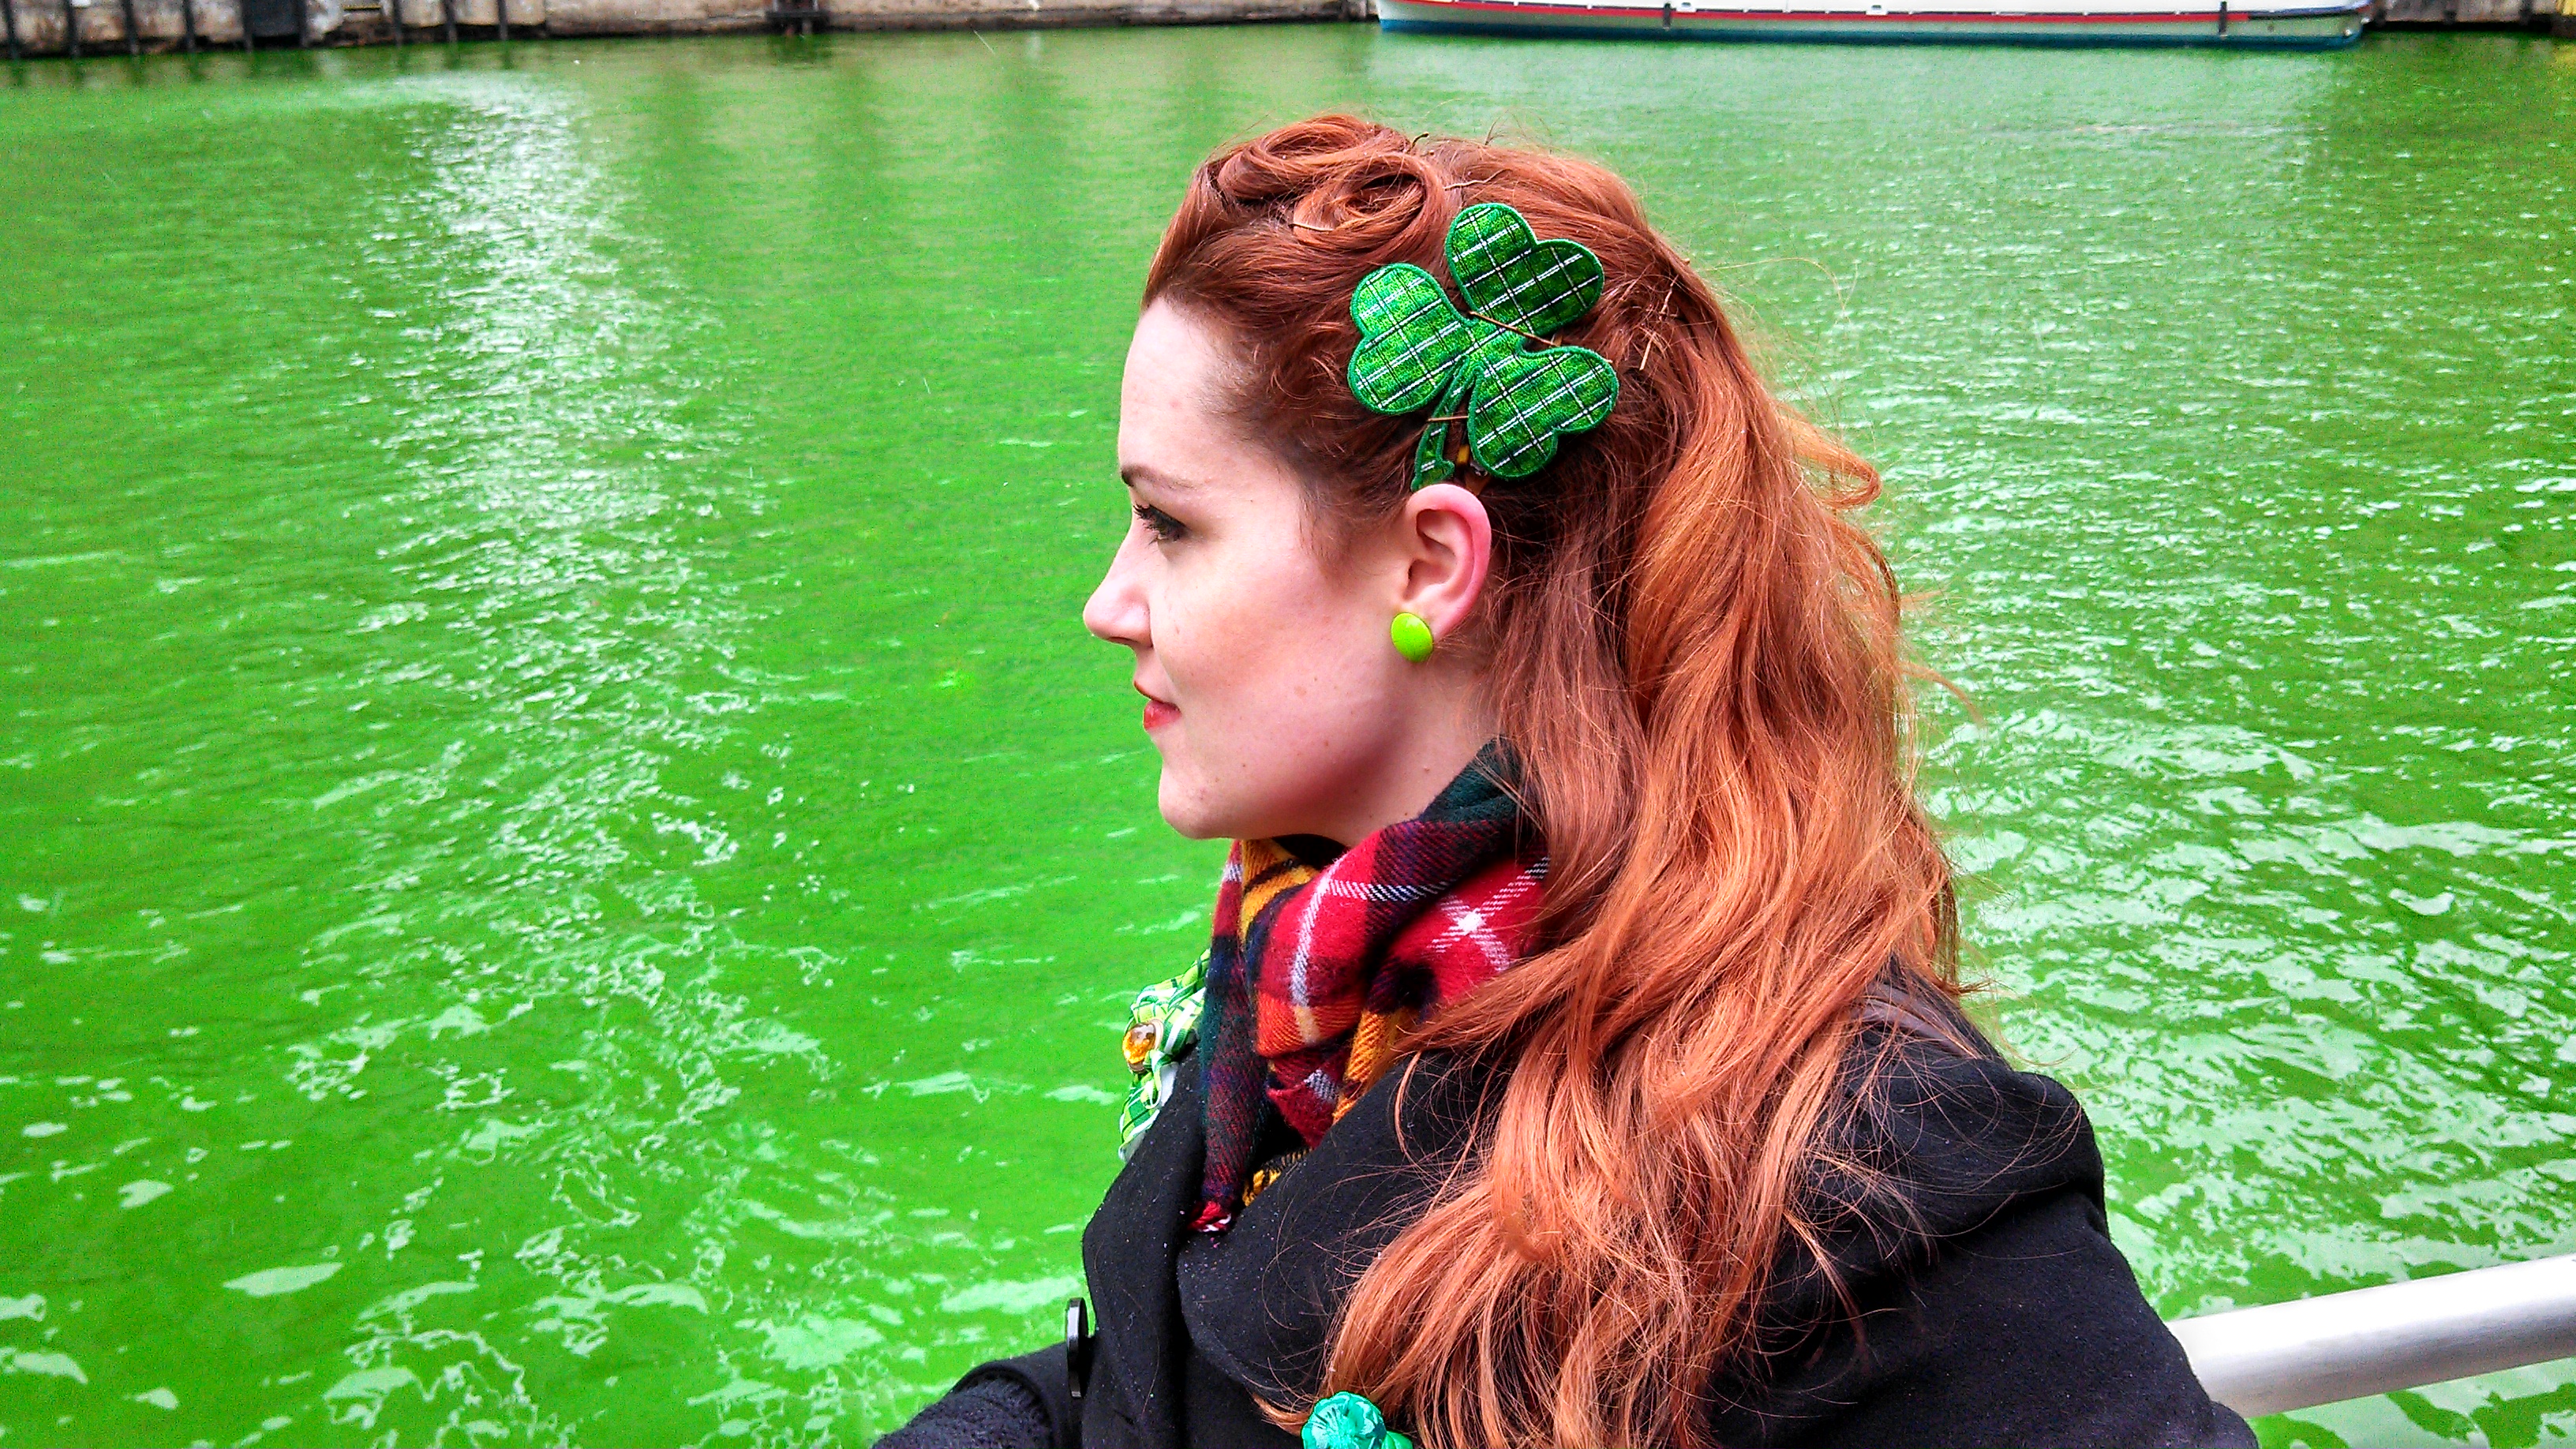 Celebrate at These St. Patrick’s Day Events in Chicago